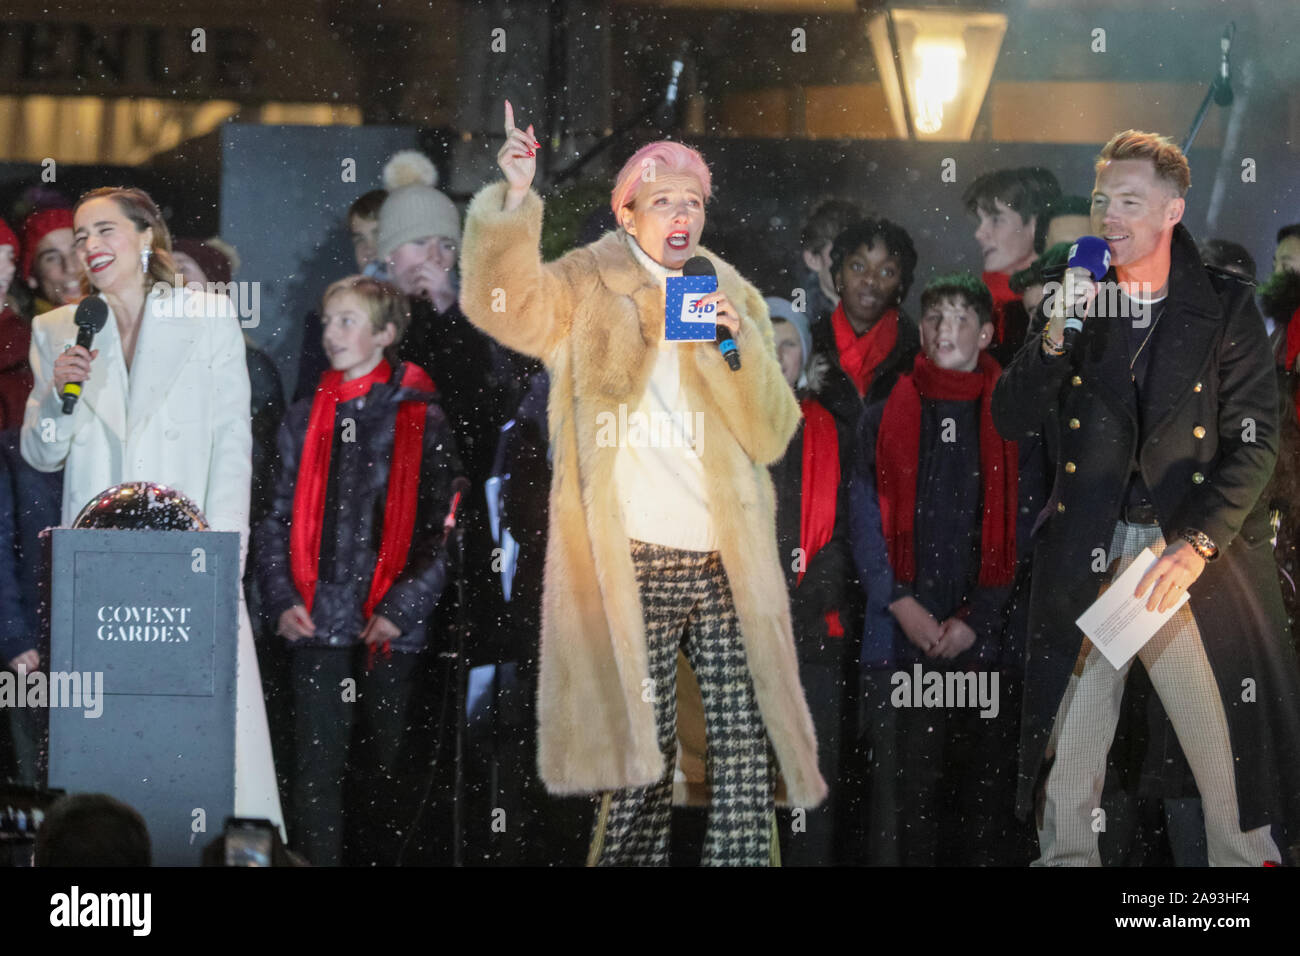 West End, London, UK, 12th November 2019. The stars of the new film 'Last Christmas', actresses Emilia Clarke, (who also starred in Game of Thrones), and British Oscar winning actress Emma Thompson, with director Paul Feig, and presenters of the show, Magic FM's Ronan Keating and Harriet Scott. Spectators watch the annual stage performance and switch on of the beautiful Covent Garden Christmas tree and lights in London's West End. Credit: Imageplotter/Alamy Live News Stock Photo